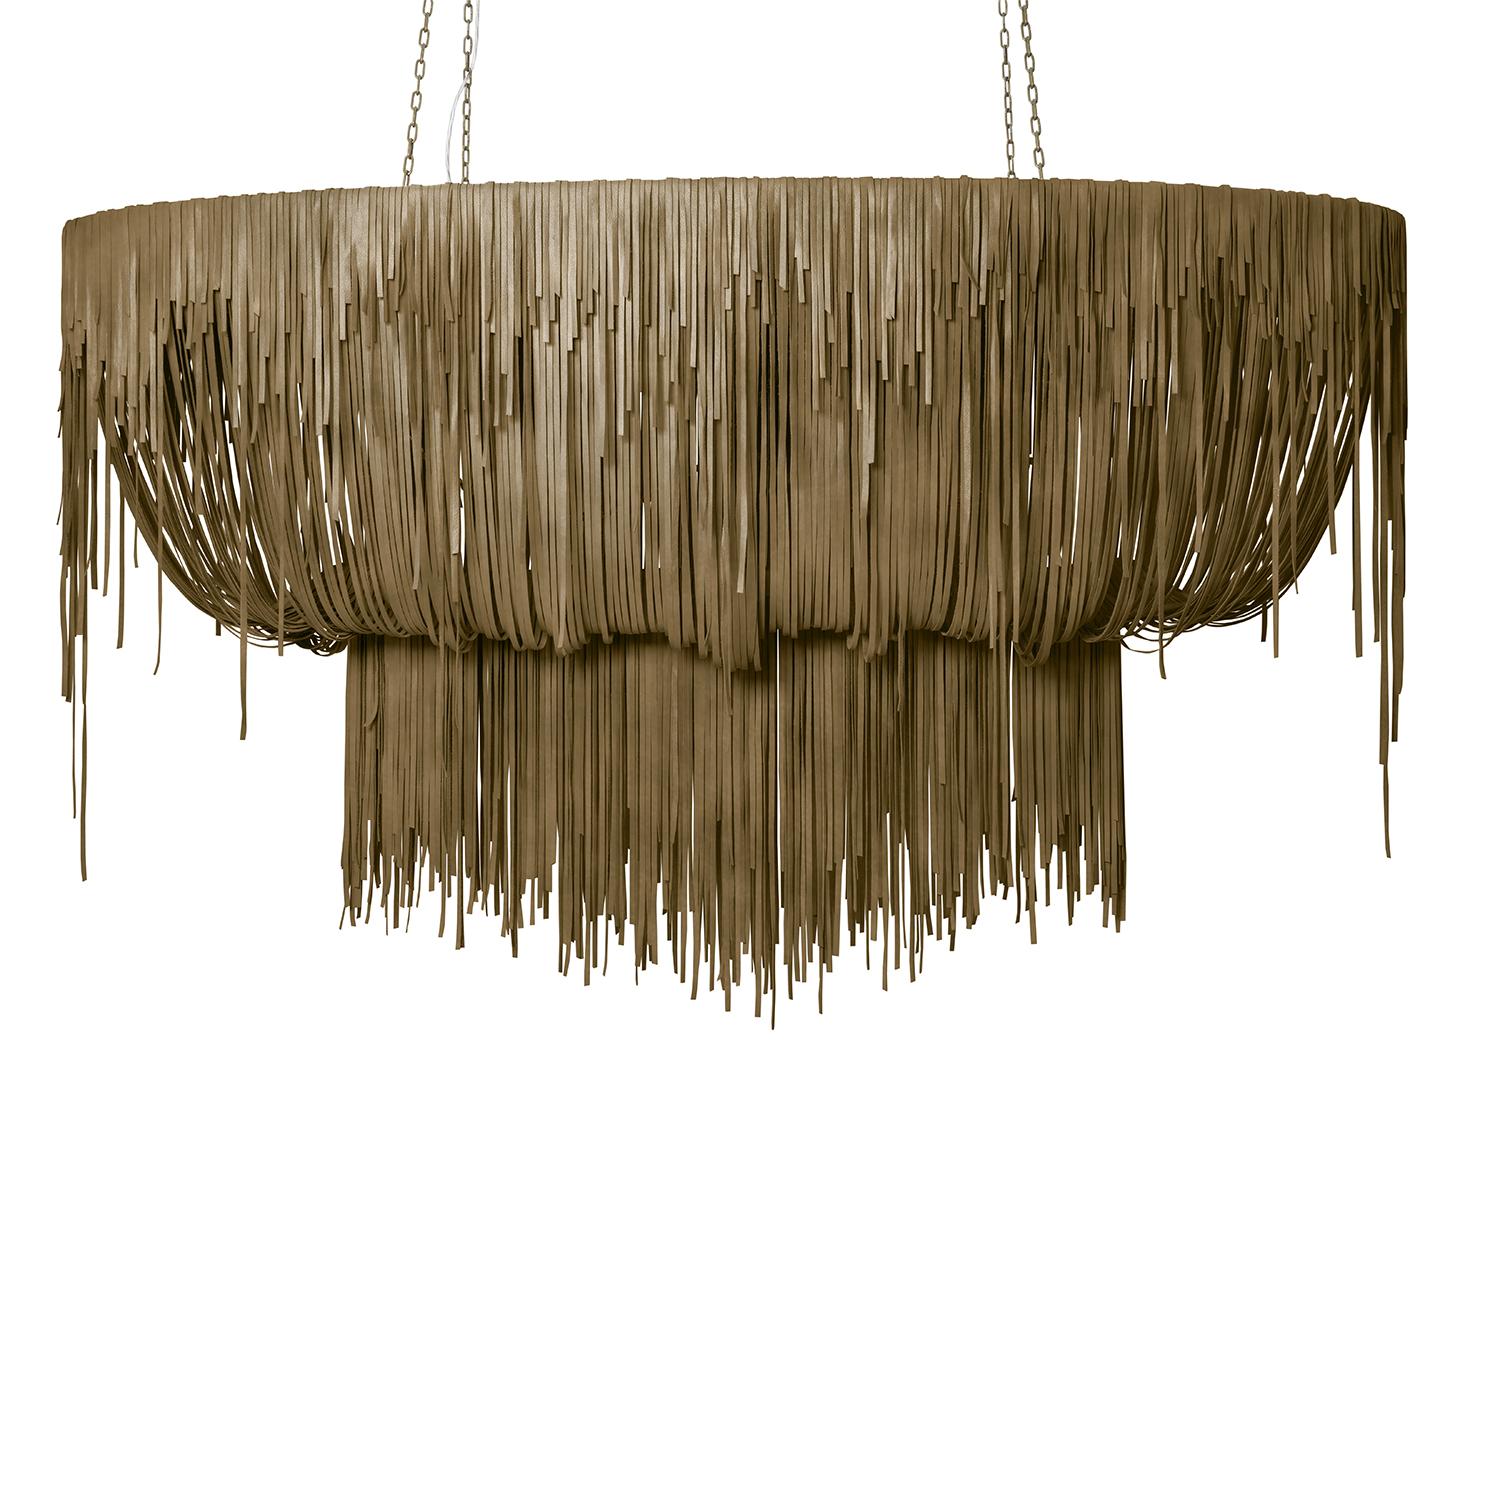 Stretch Oval Urchin Leather Chandelier in Premium Leather